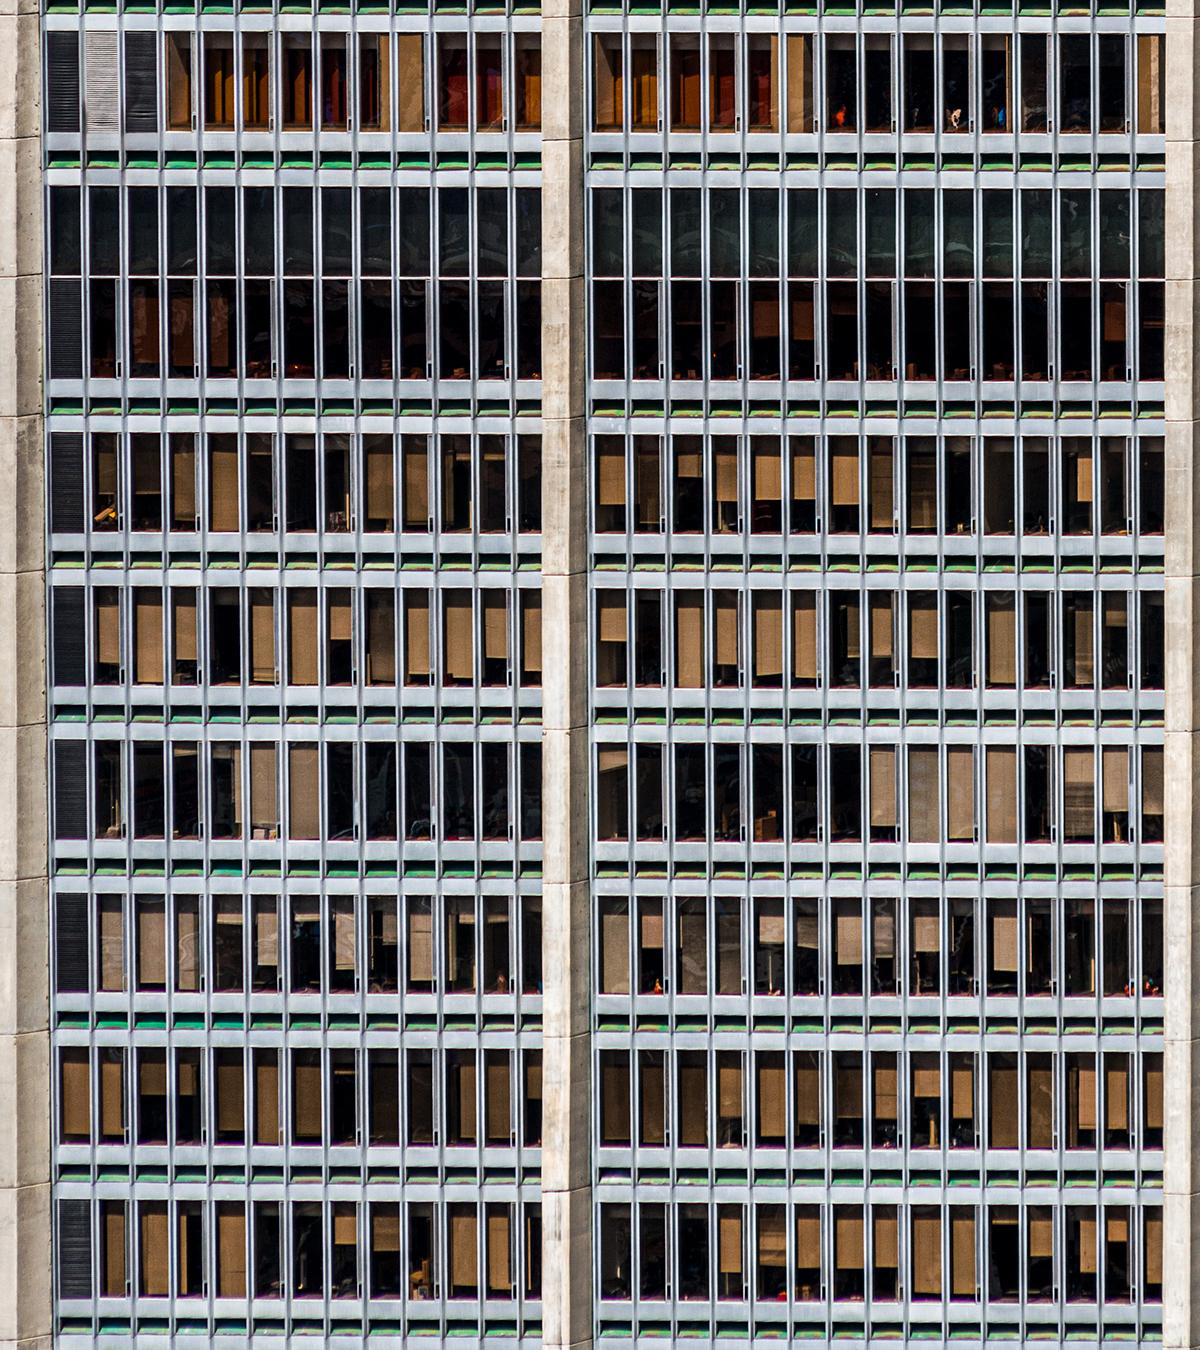 1002 Windows. Abstract architectural  landscape color photograph  - Photograph by Javier Rey